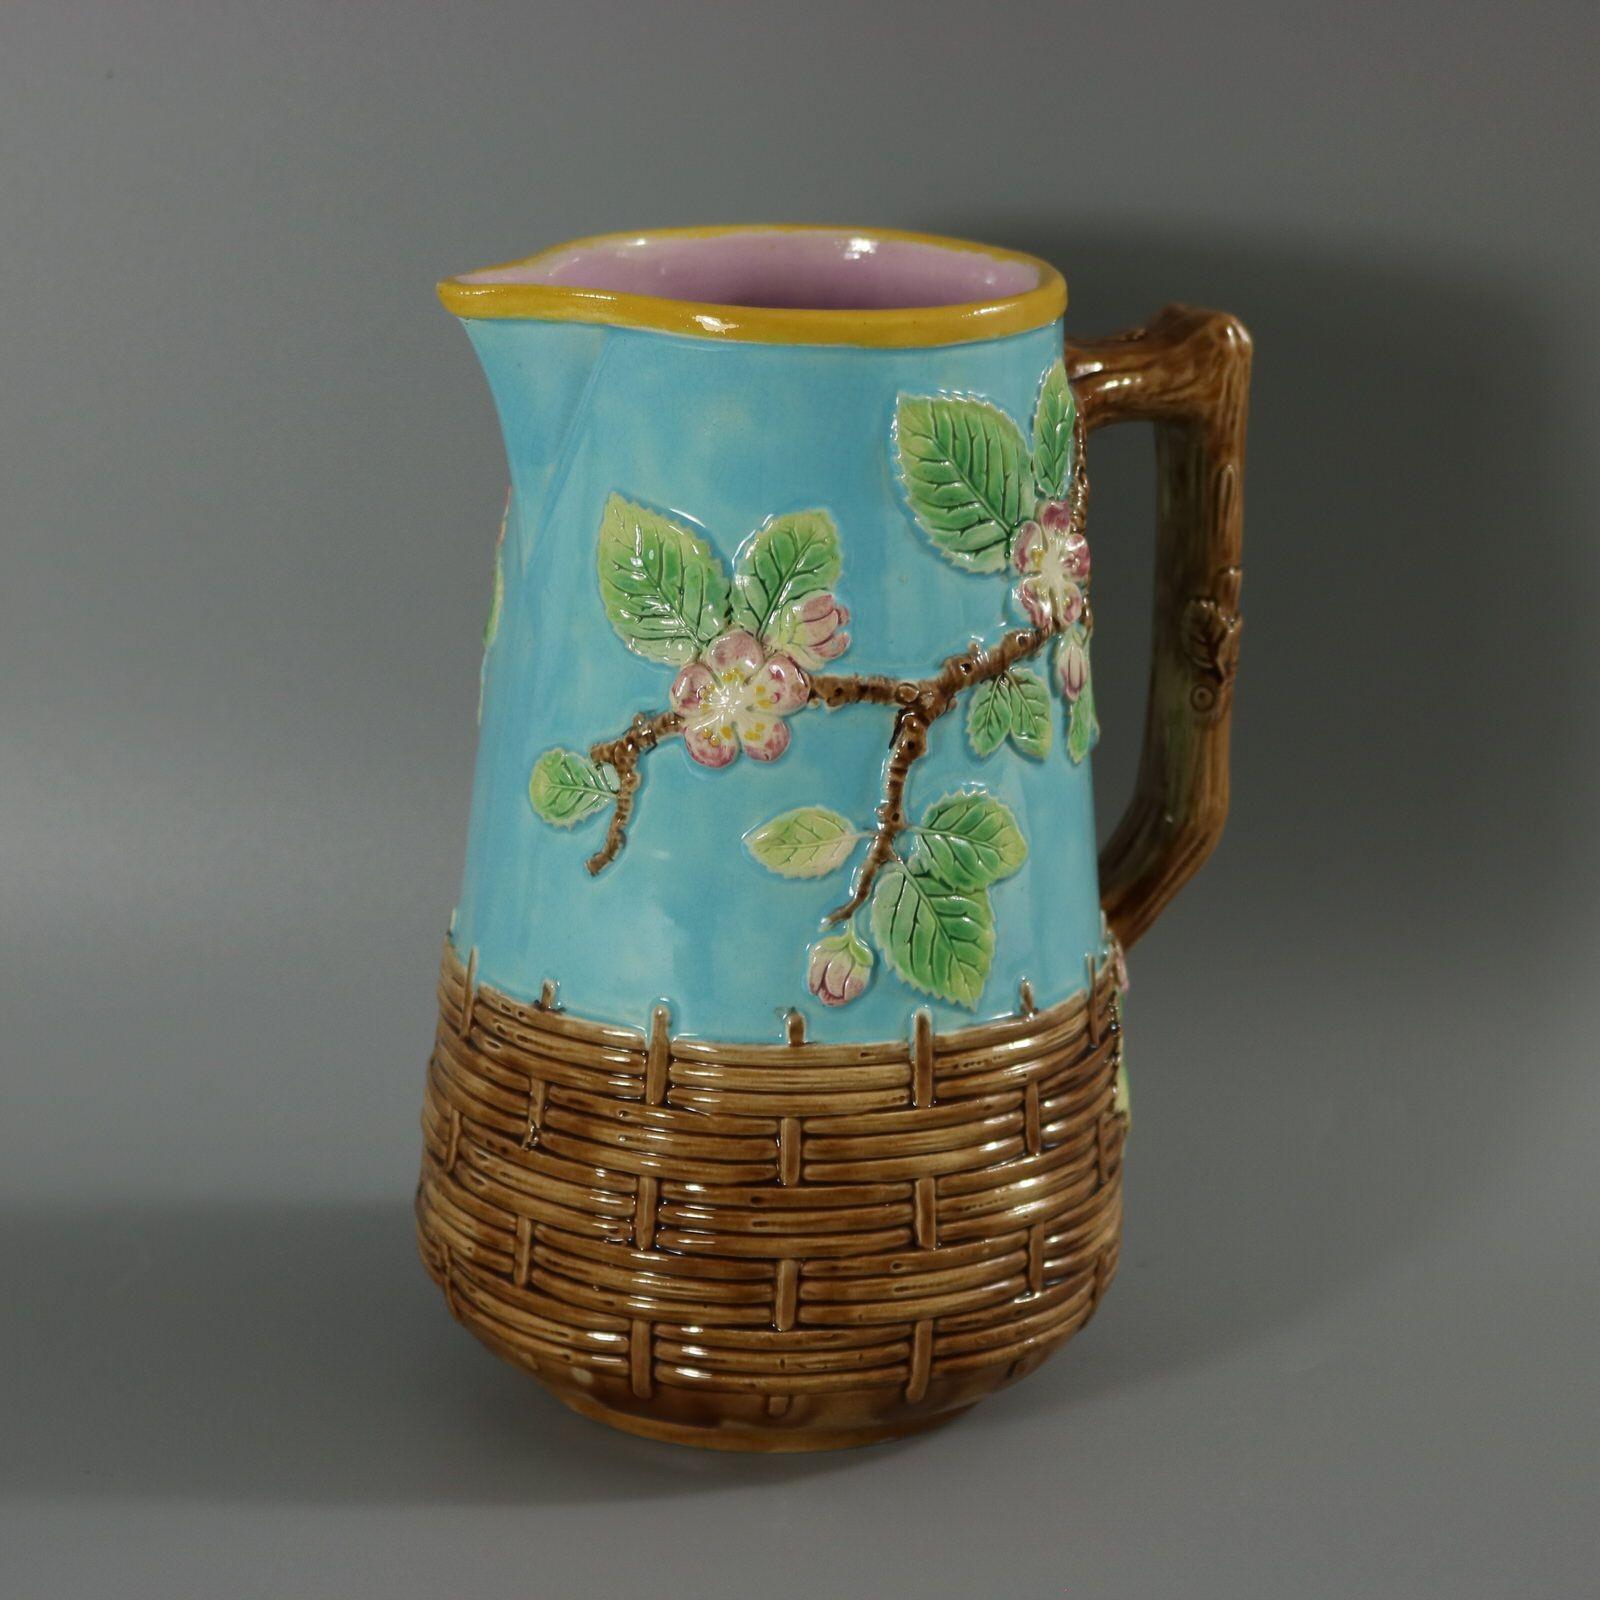 George Jones Majolica jug/pitcher which features a branch handle, with apple blossom branching off on either side and a basket weave border to bottom. Turquoise ground version. Colouration: turquoise, brown, green, are predominant. English diamond